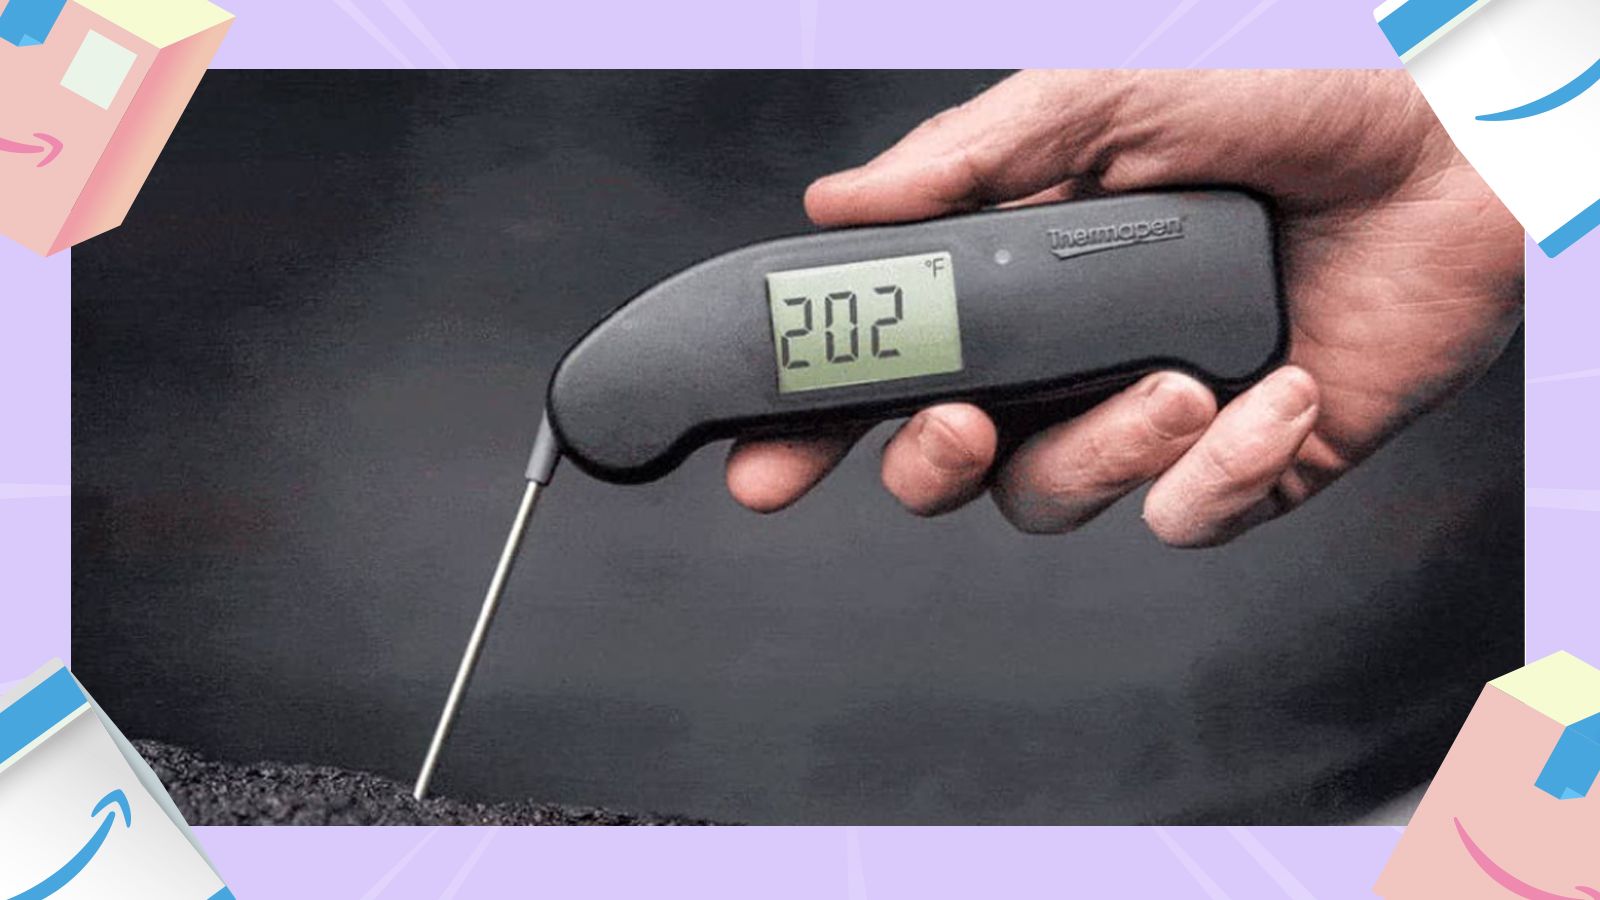 Thermoworks Thermapen ONE - BLACK